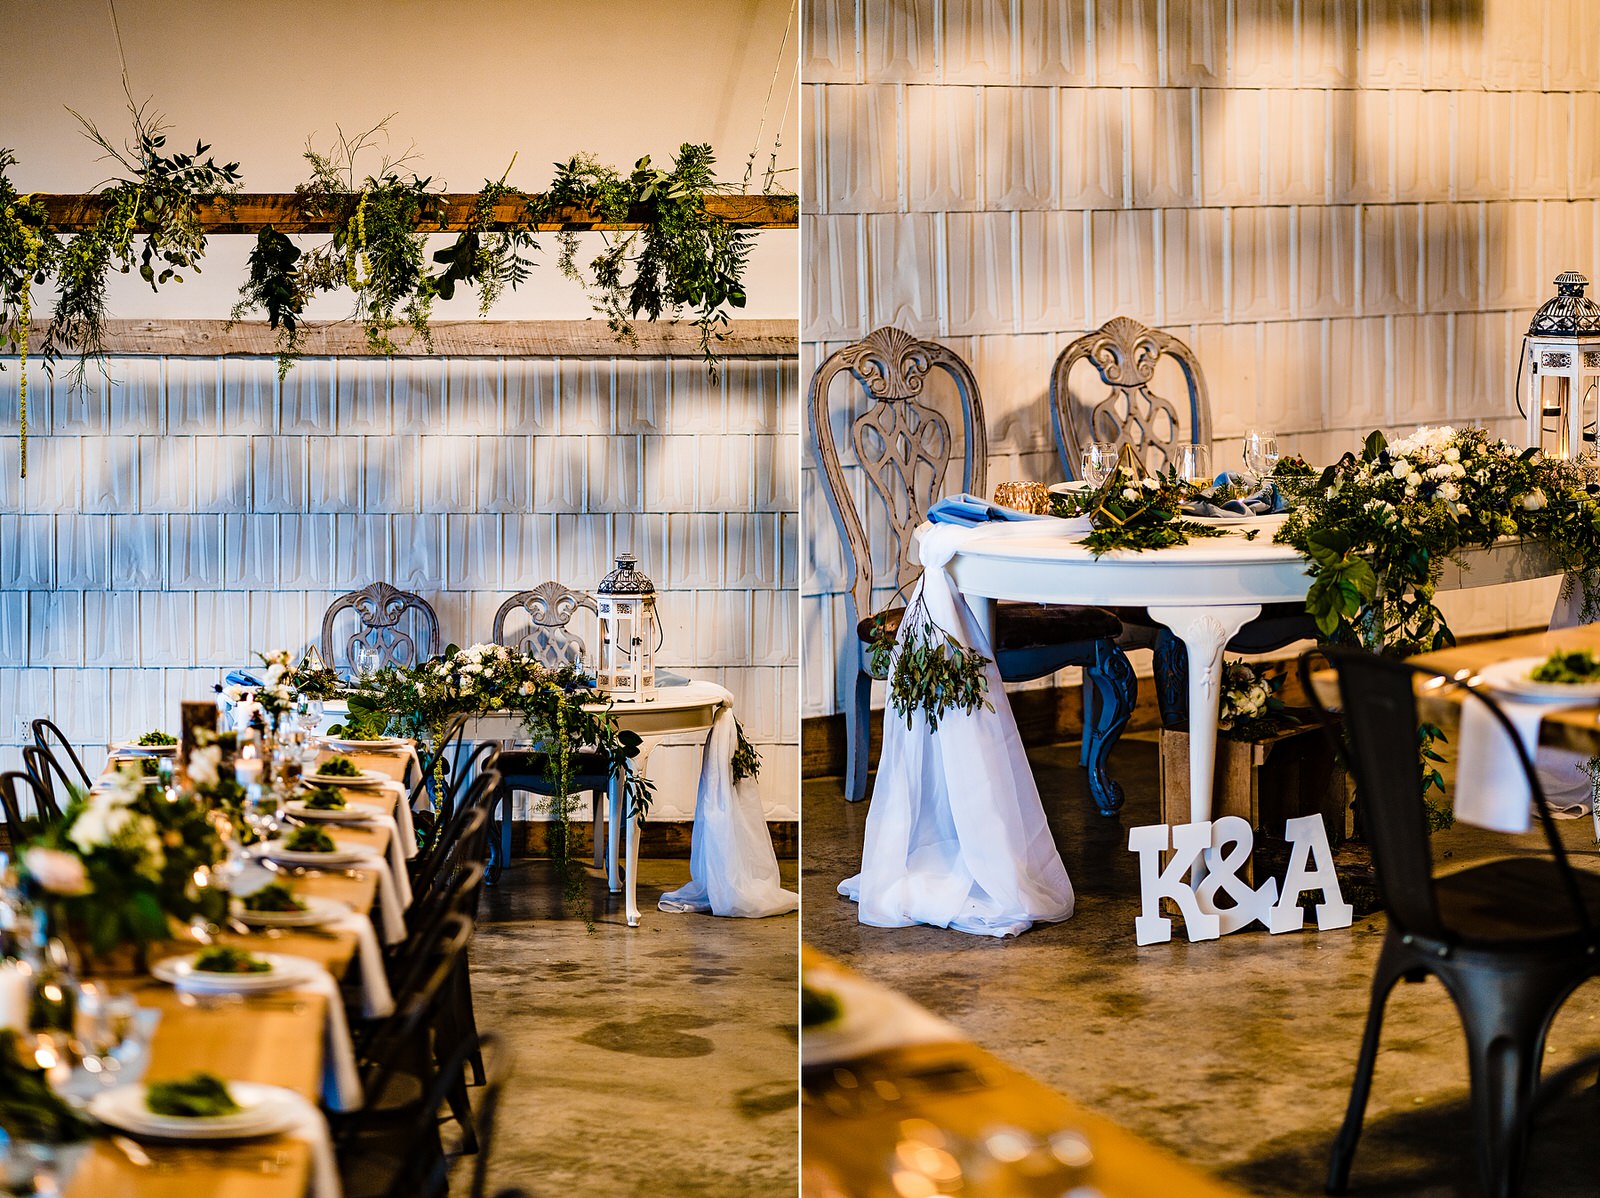 Green and white decor at The Meadows Raleigh wedding reception by Raleigh wedding photographers